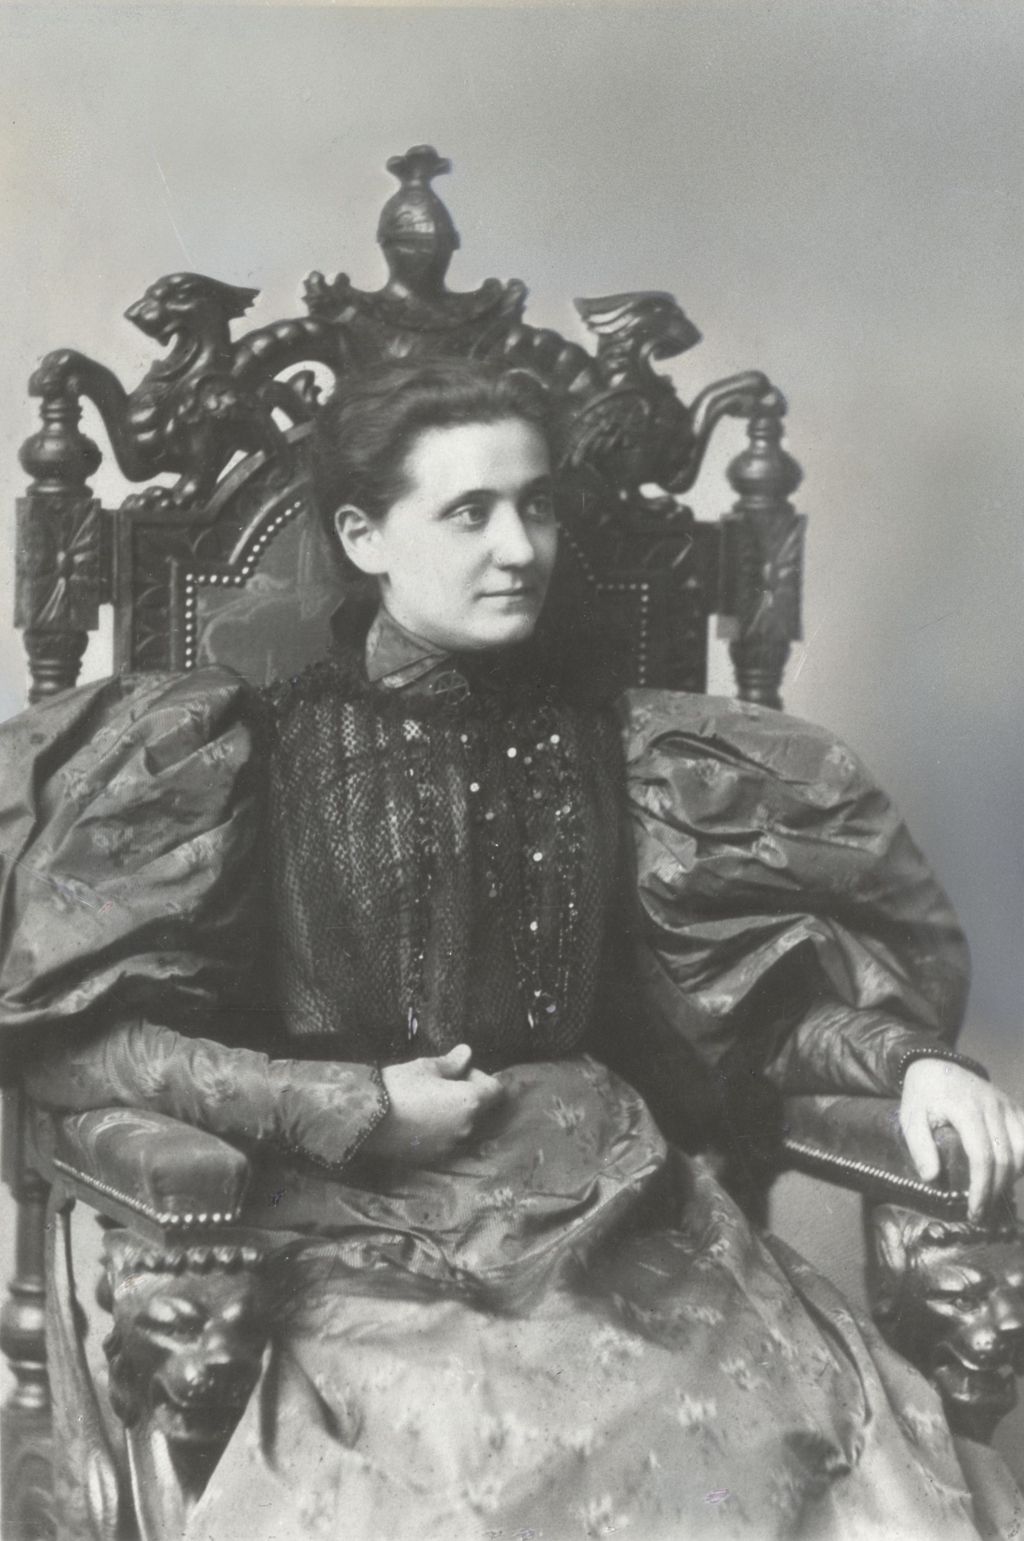 Miniature of Jane Addams seated in ornate chair